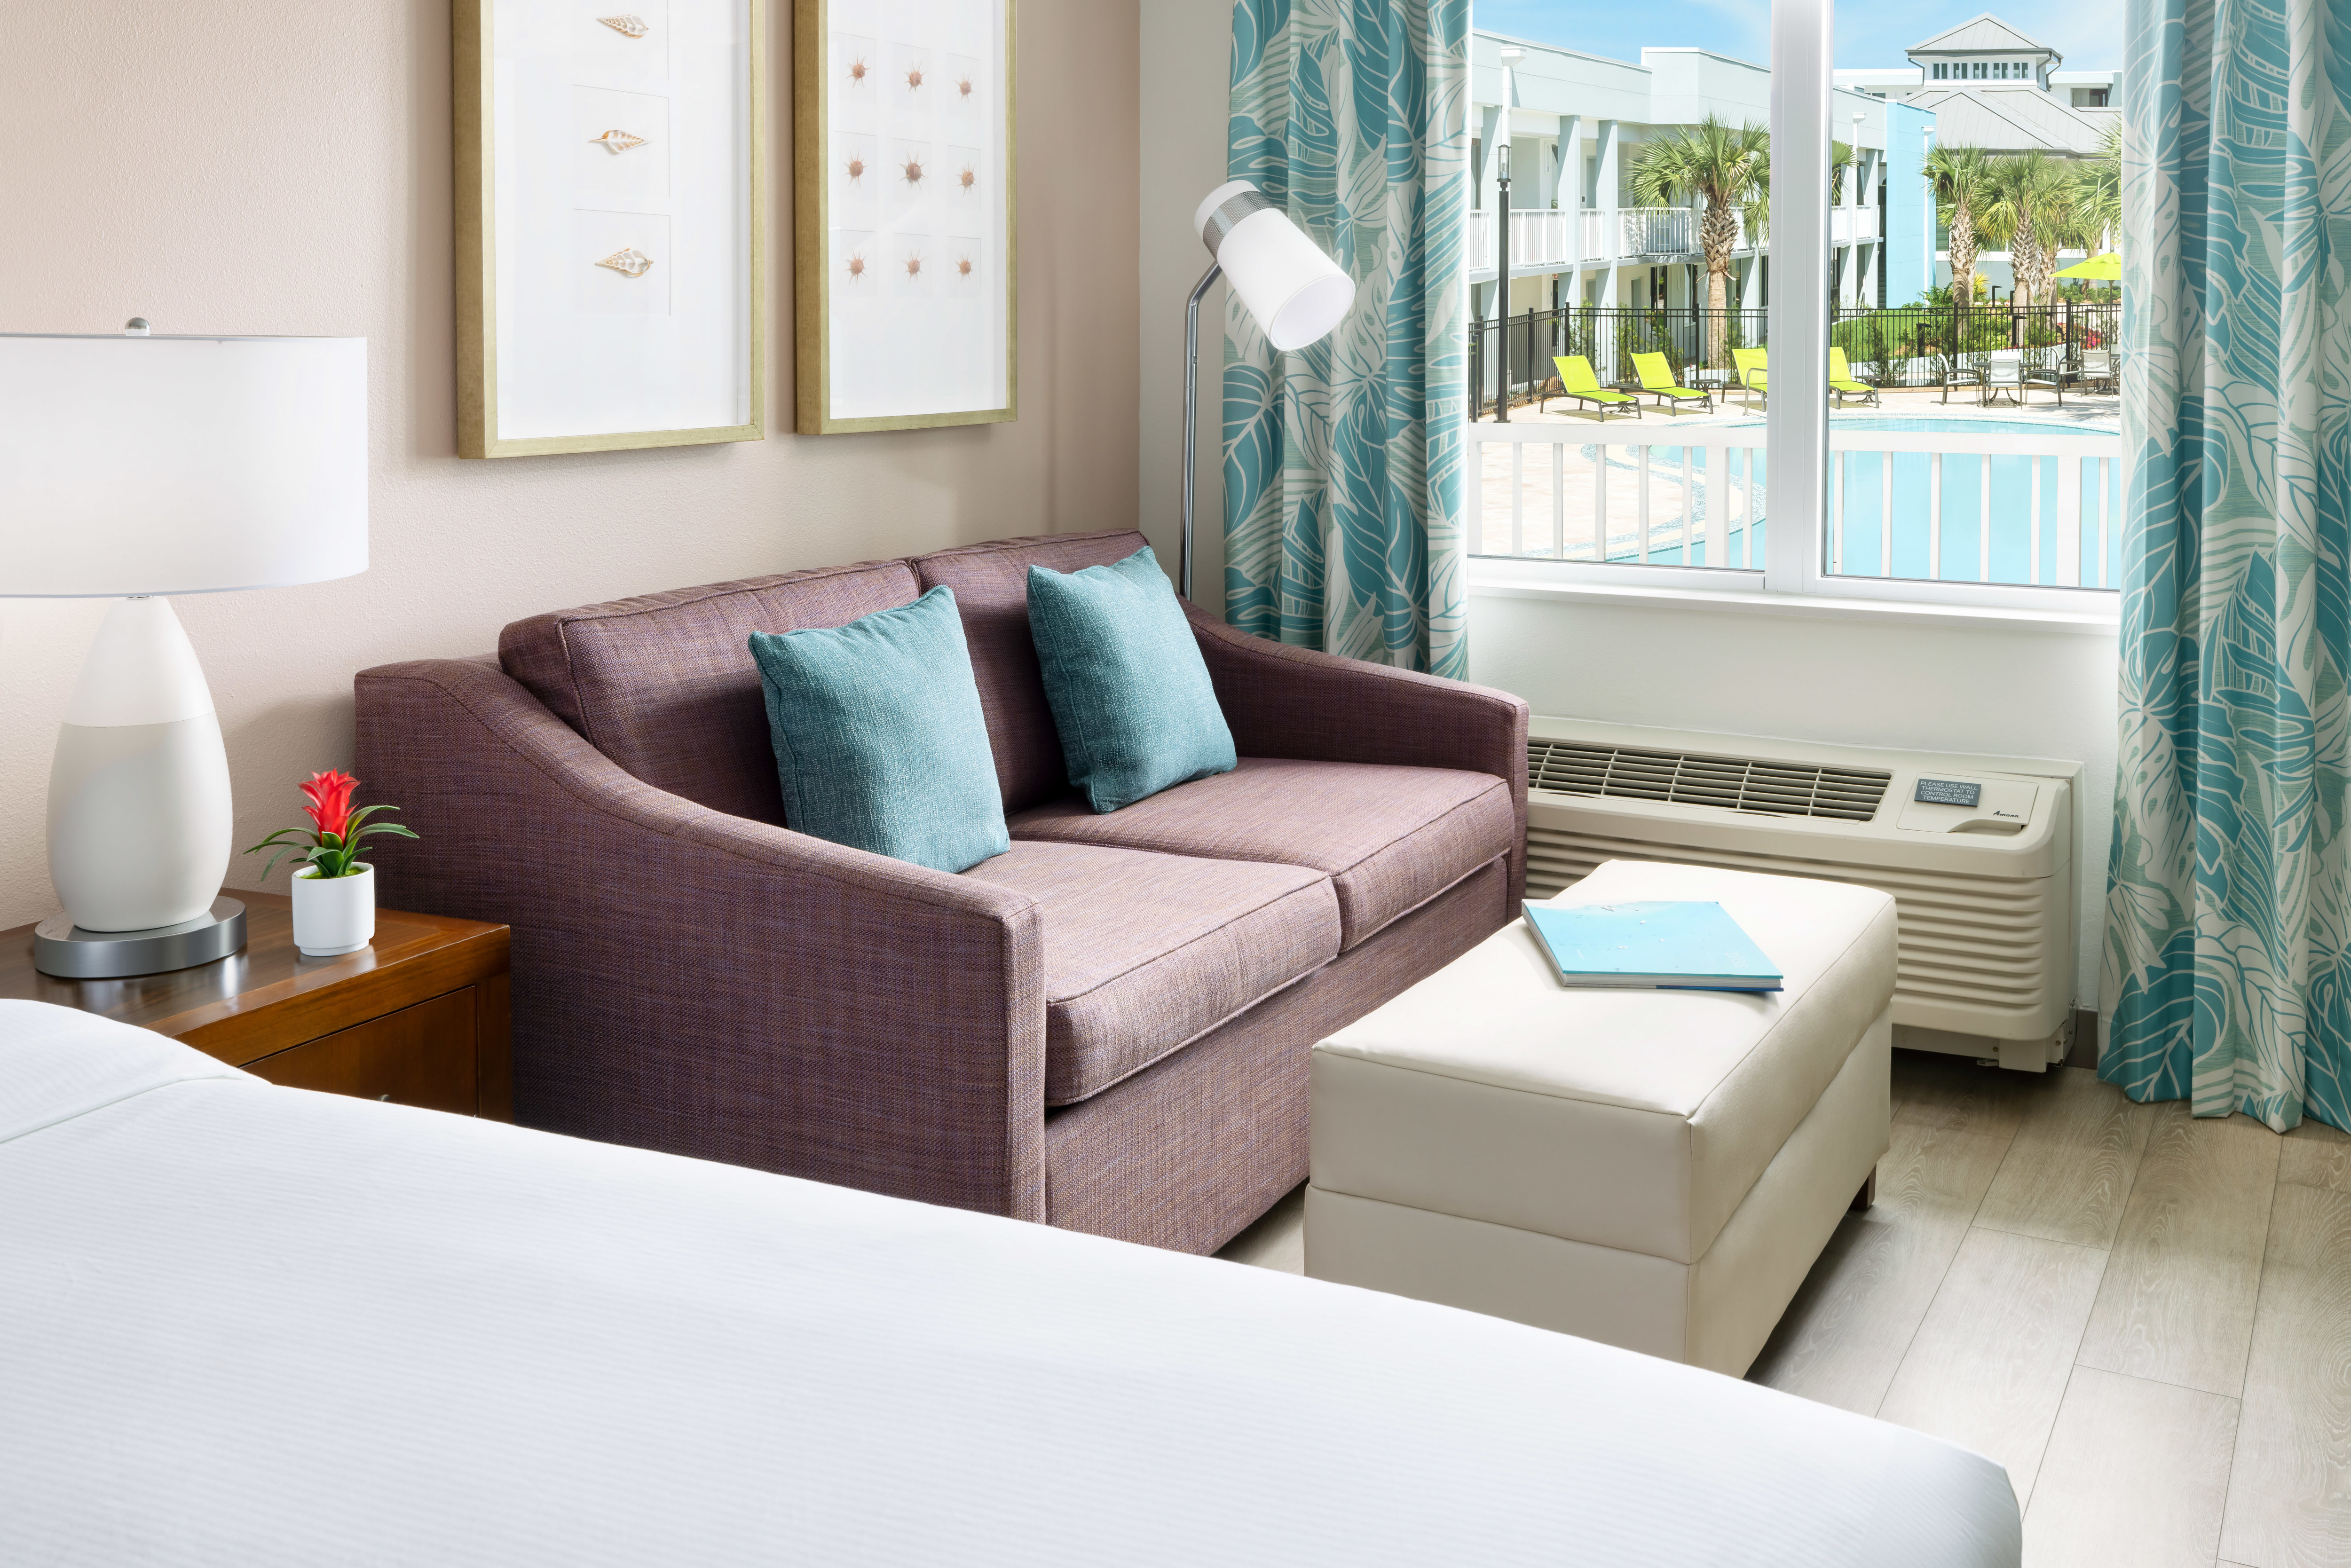 Bed, Sofa in a Guest Room with Pool View